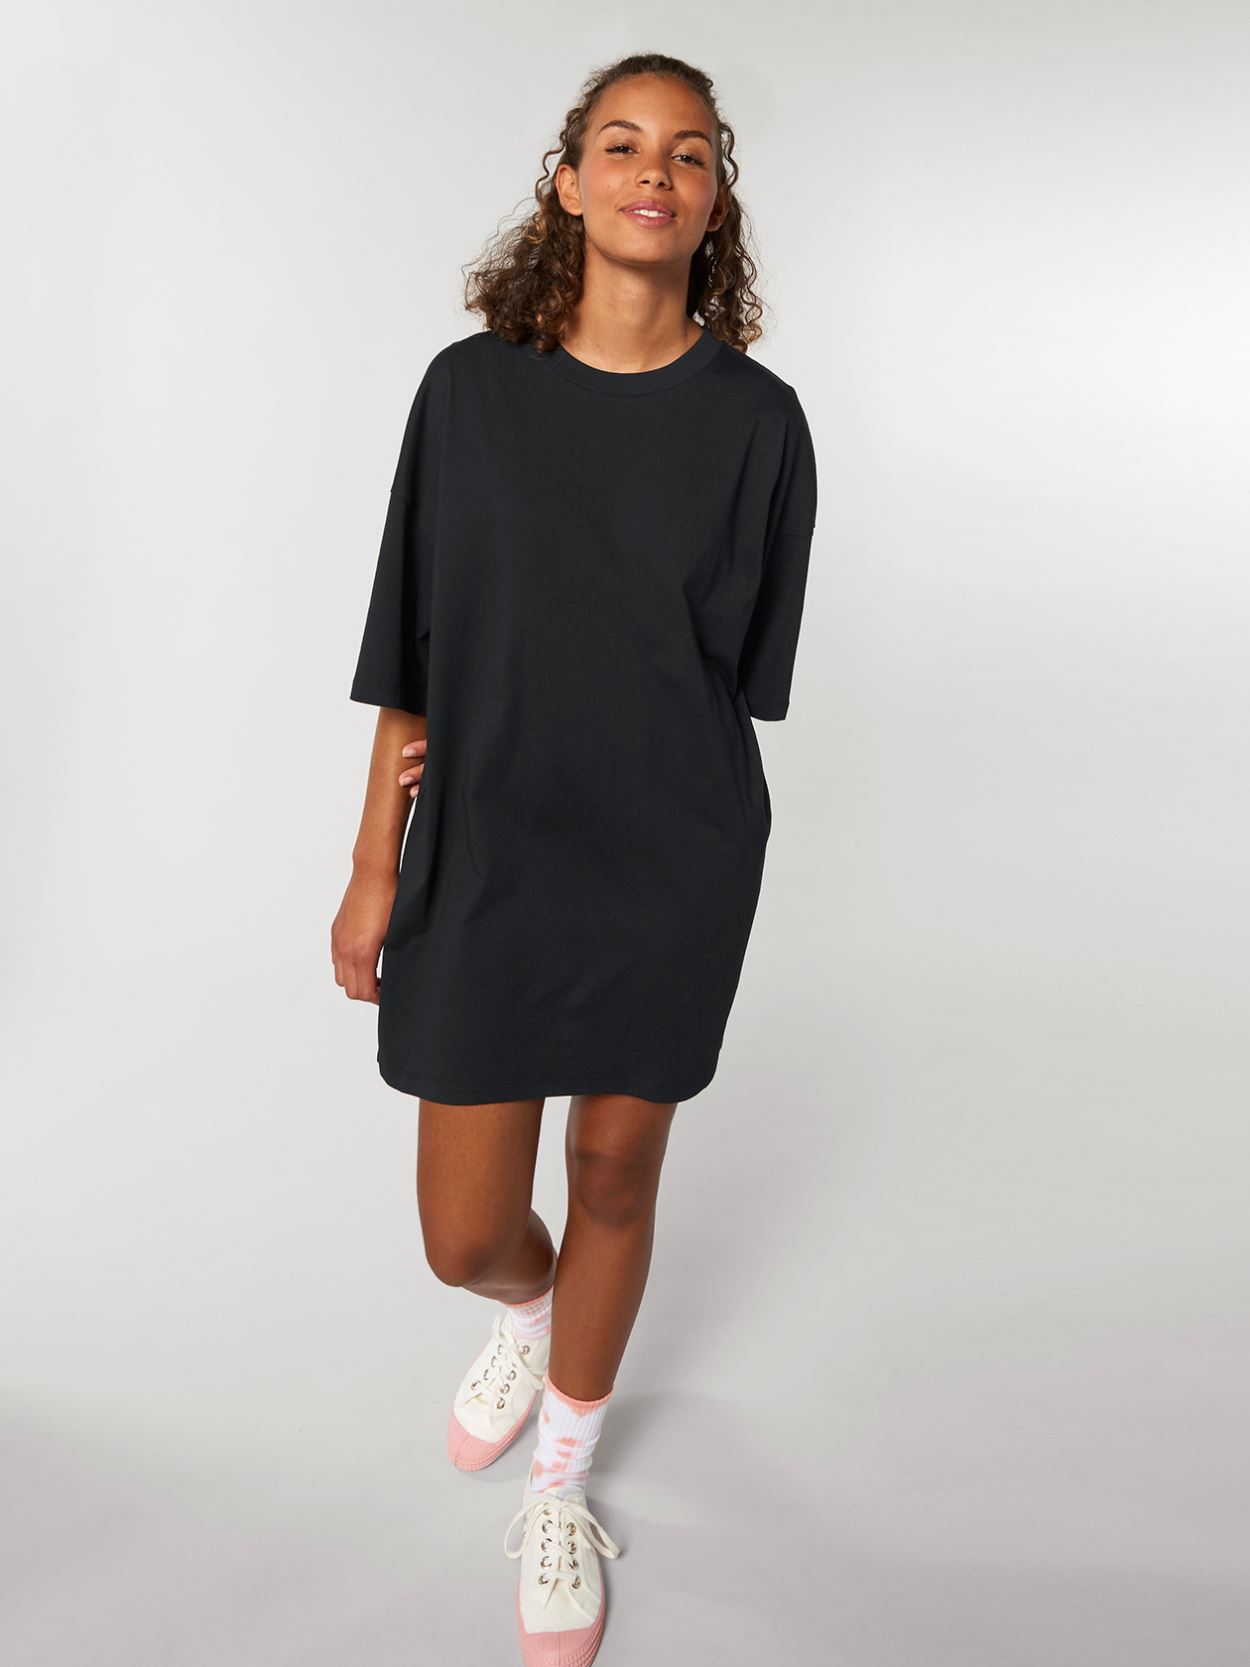 Stella and Stanley SX103 Twister, The Women's Oversized T-Shirt Dress ...